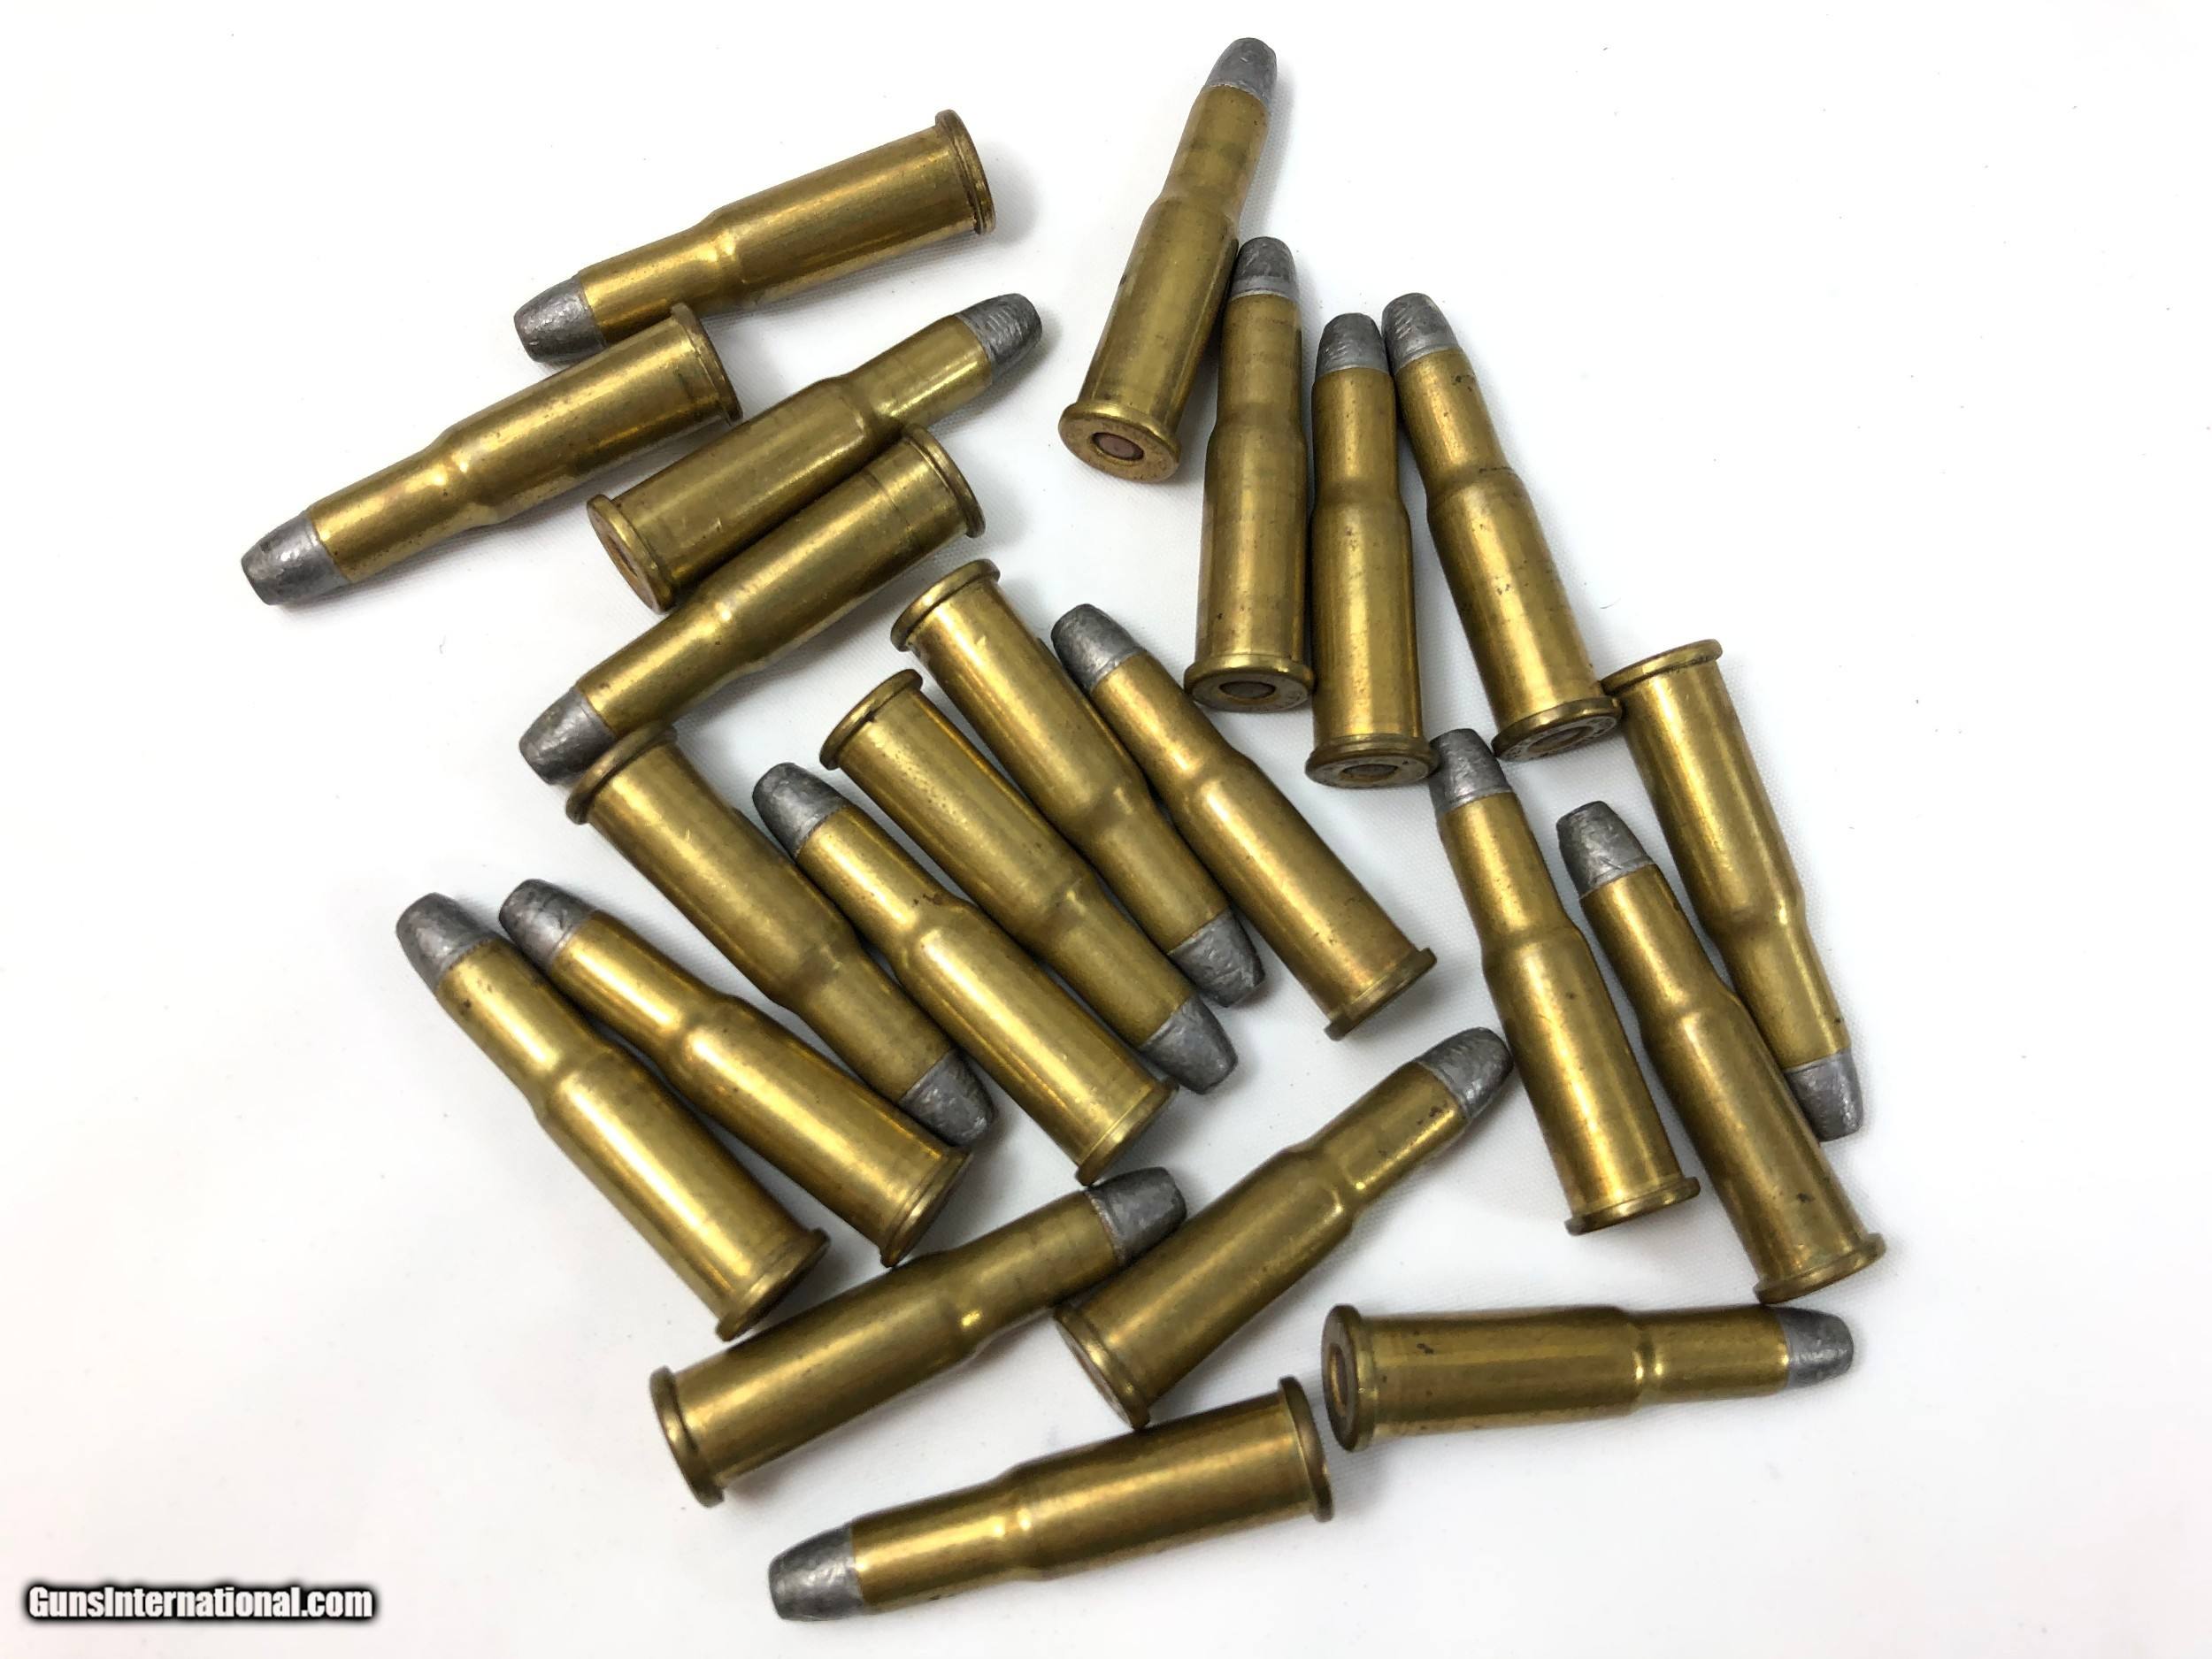 Cartridge of the Week: The .25-20 Winchester